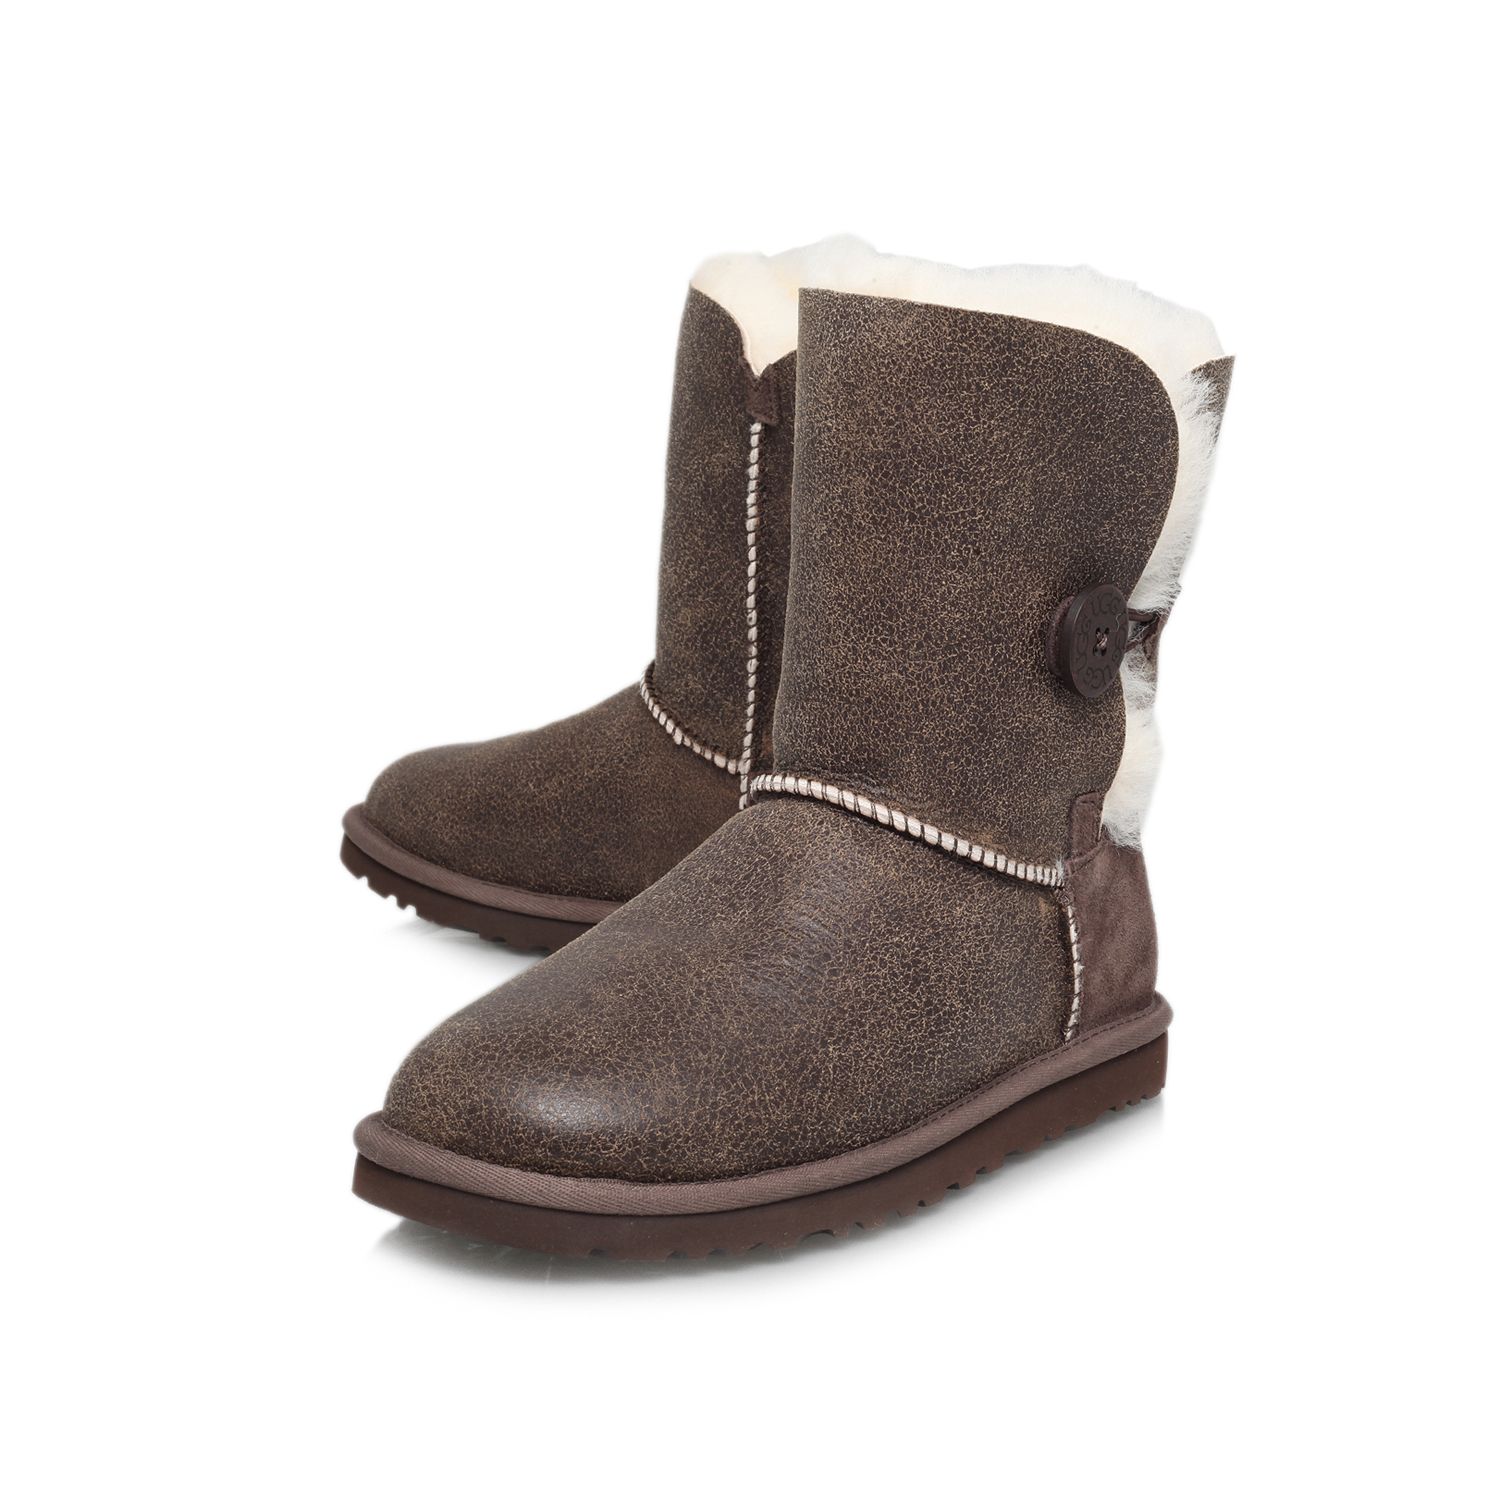 ugg bailey 3 button boots sale